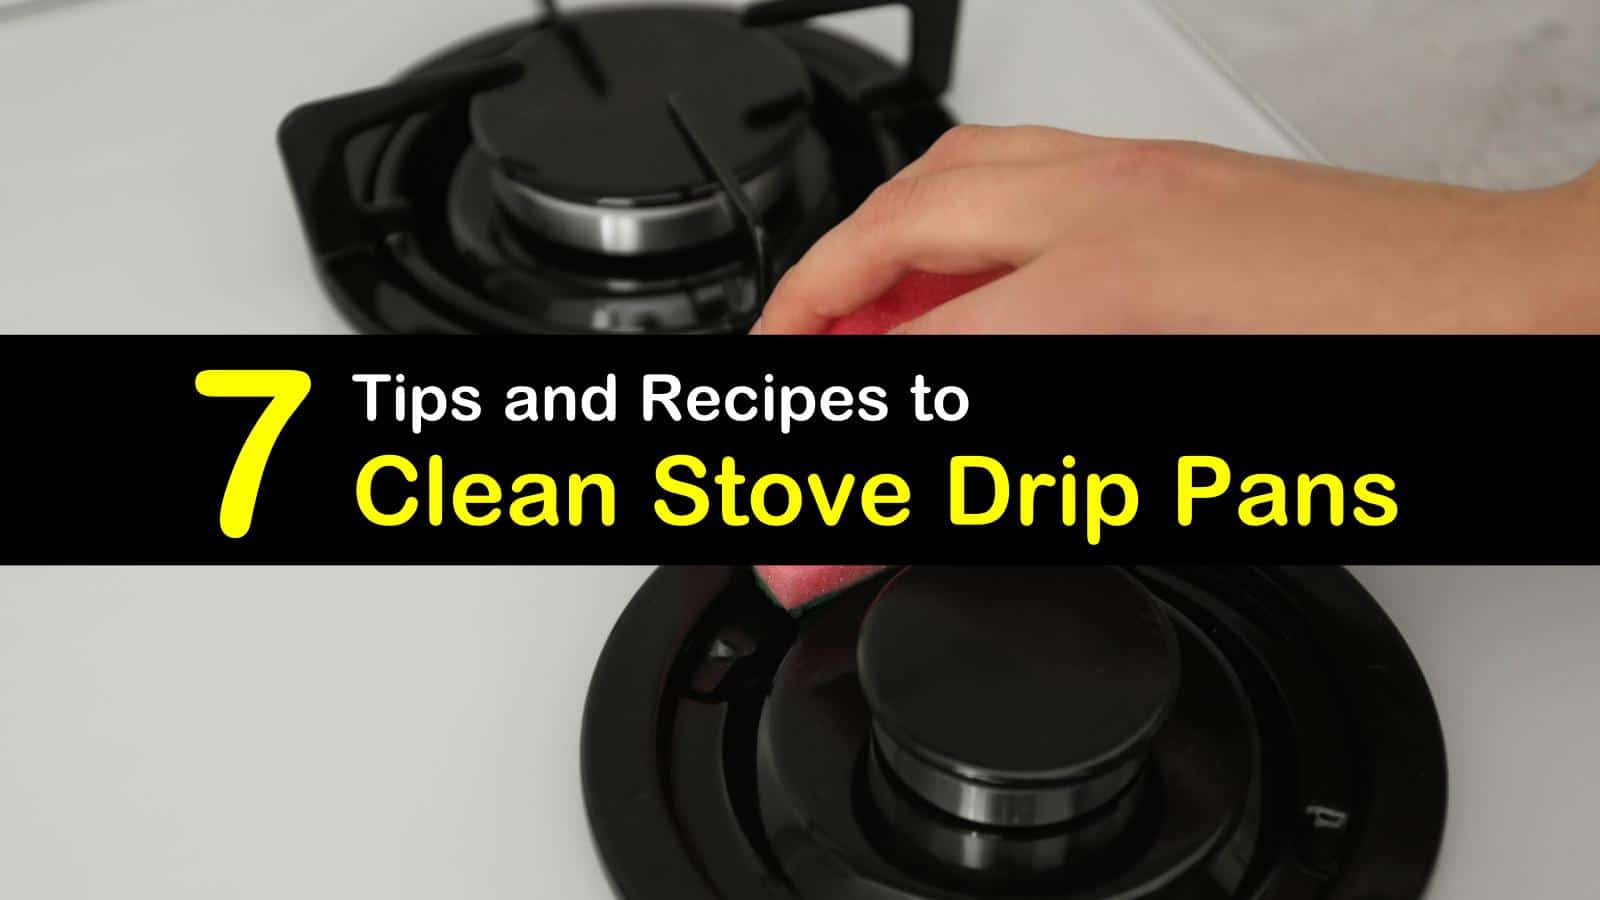 https://www.tipsbulletin.com/wp-content/uploads/2019/09/how-to-clean-stove-drip-pans-t1.jpg